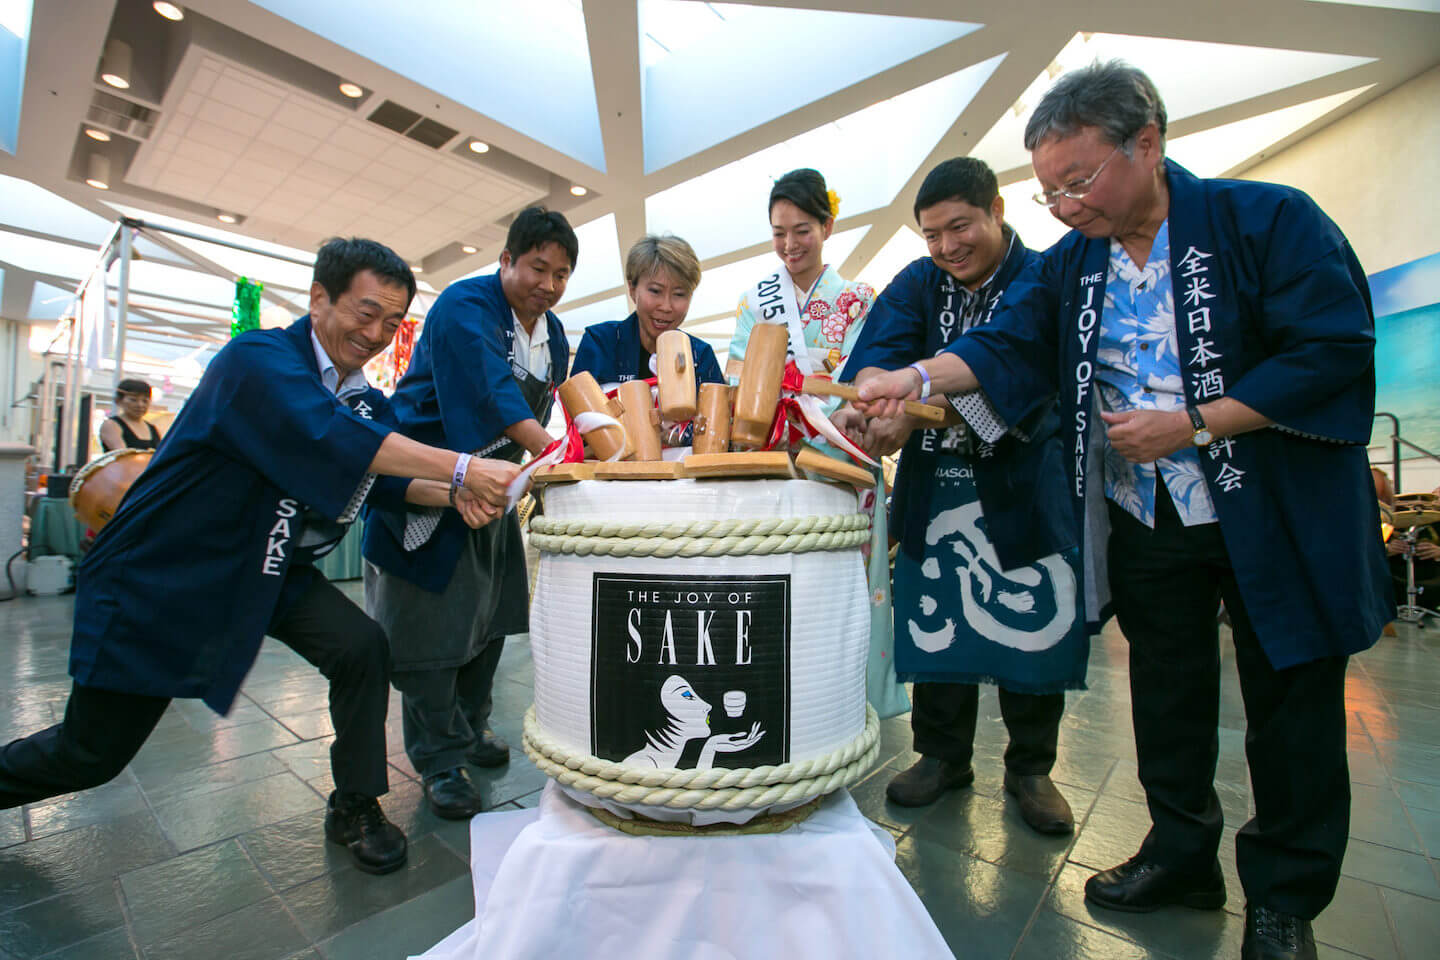 Brewers, Miss Sake and others opening a sake barrel with wooden mallets (2015 Honolulu)